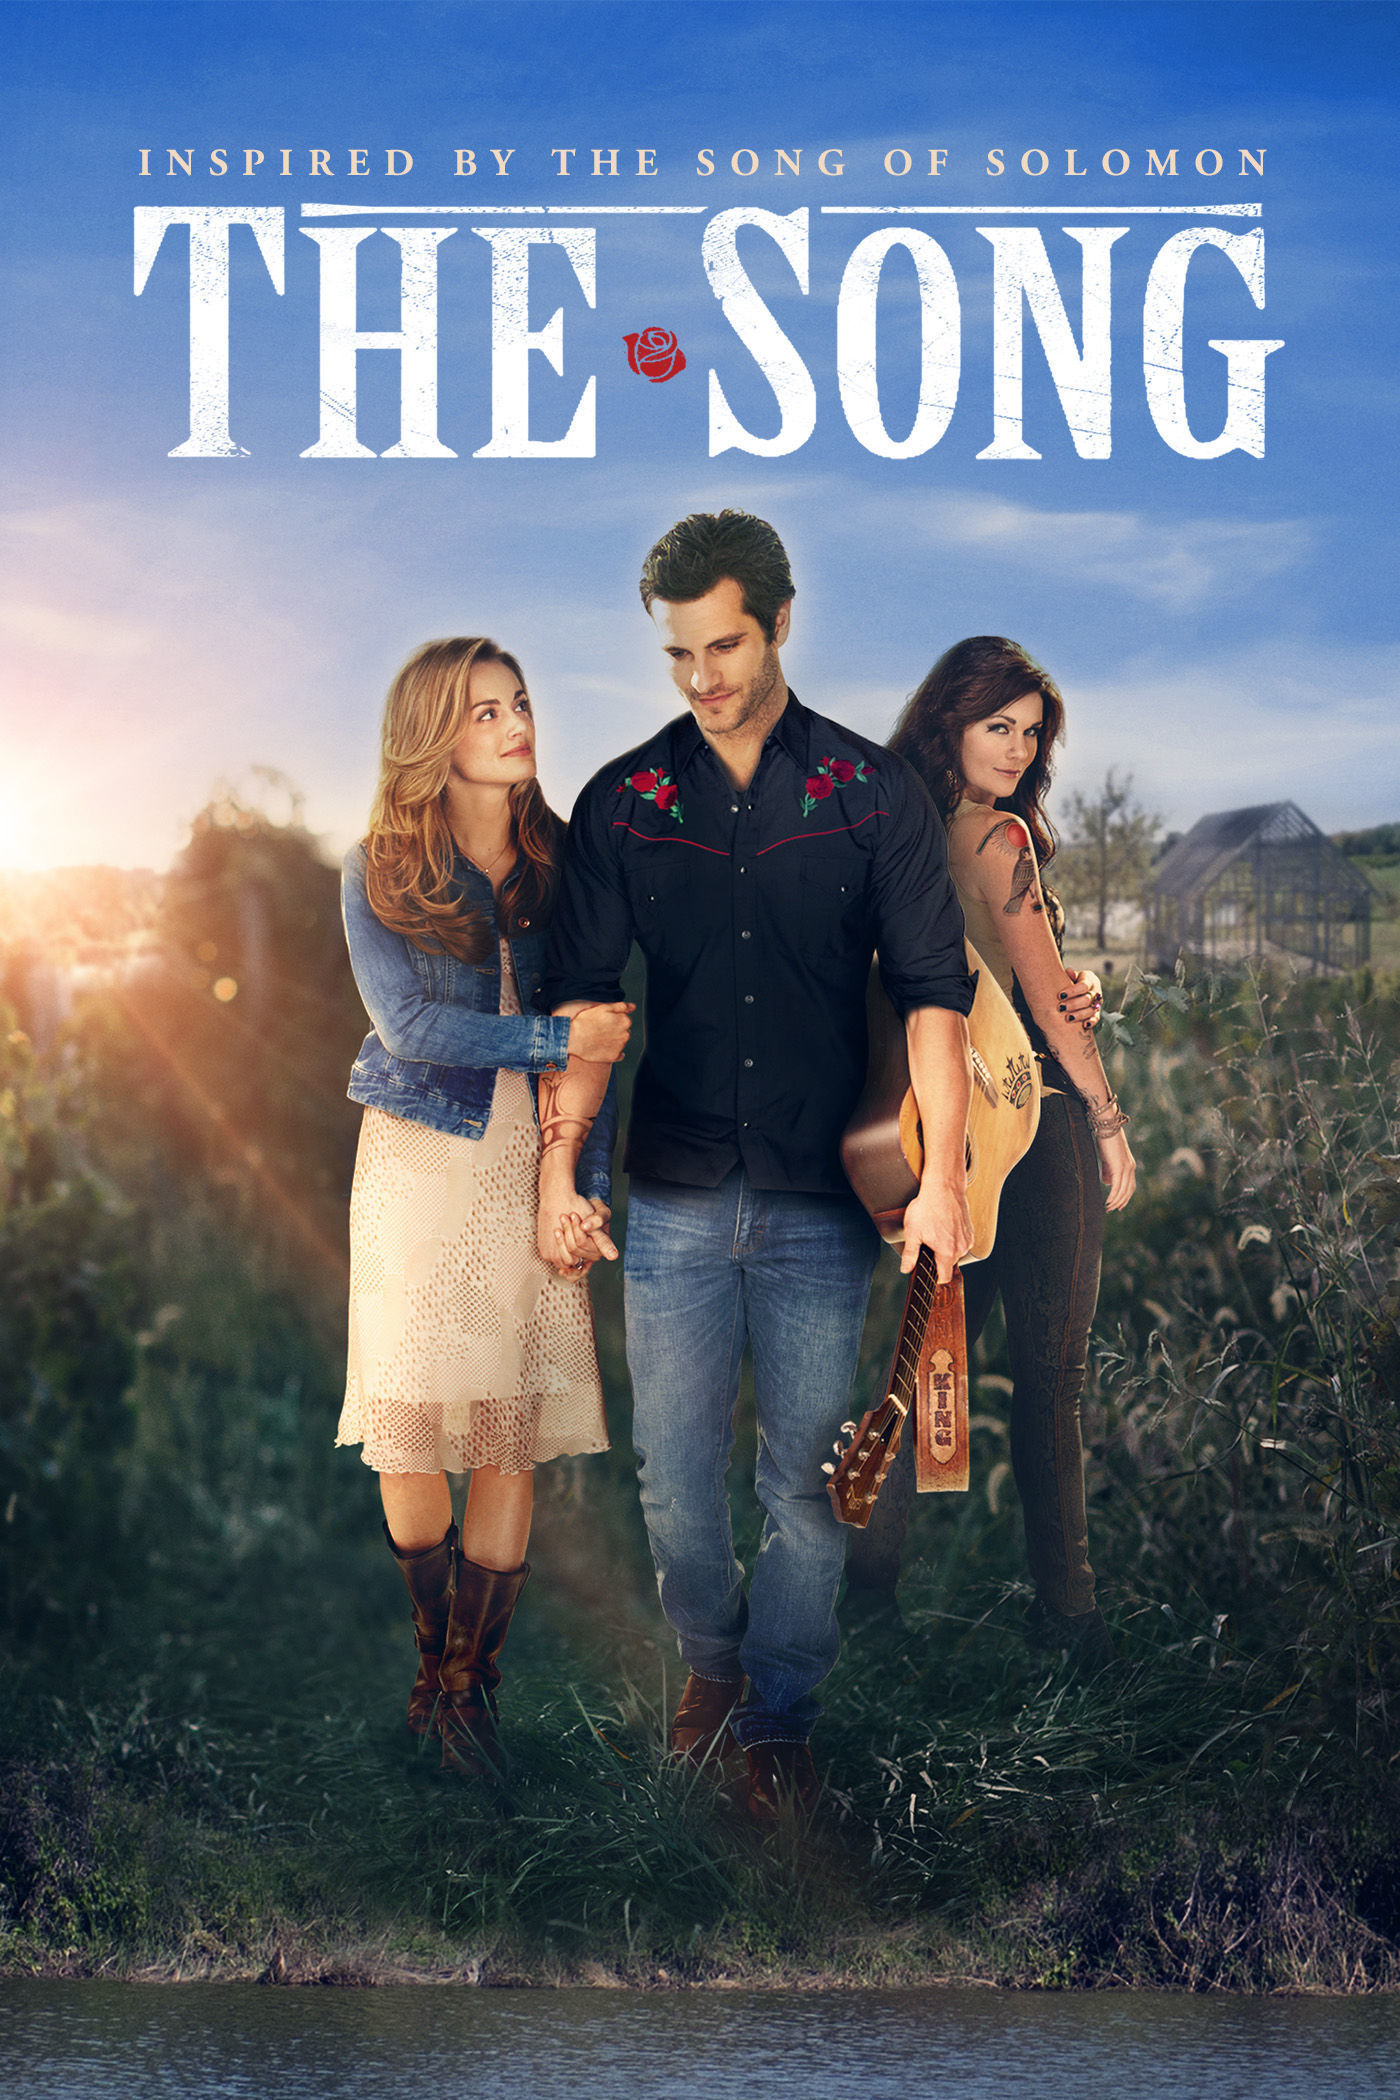 Poster for the movie "The Song"